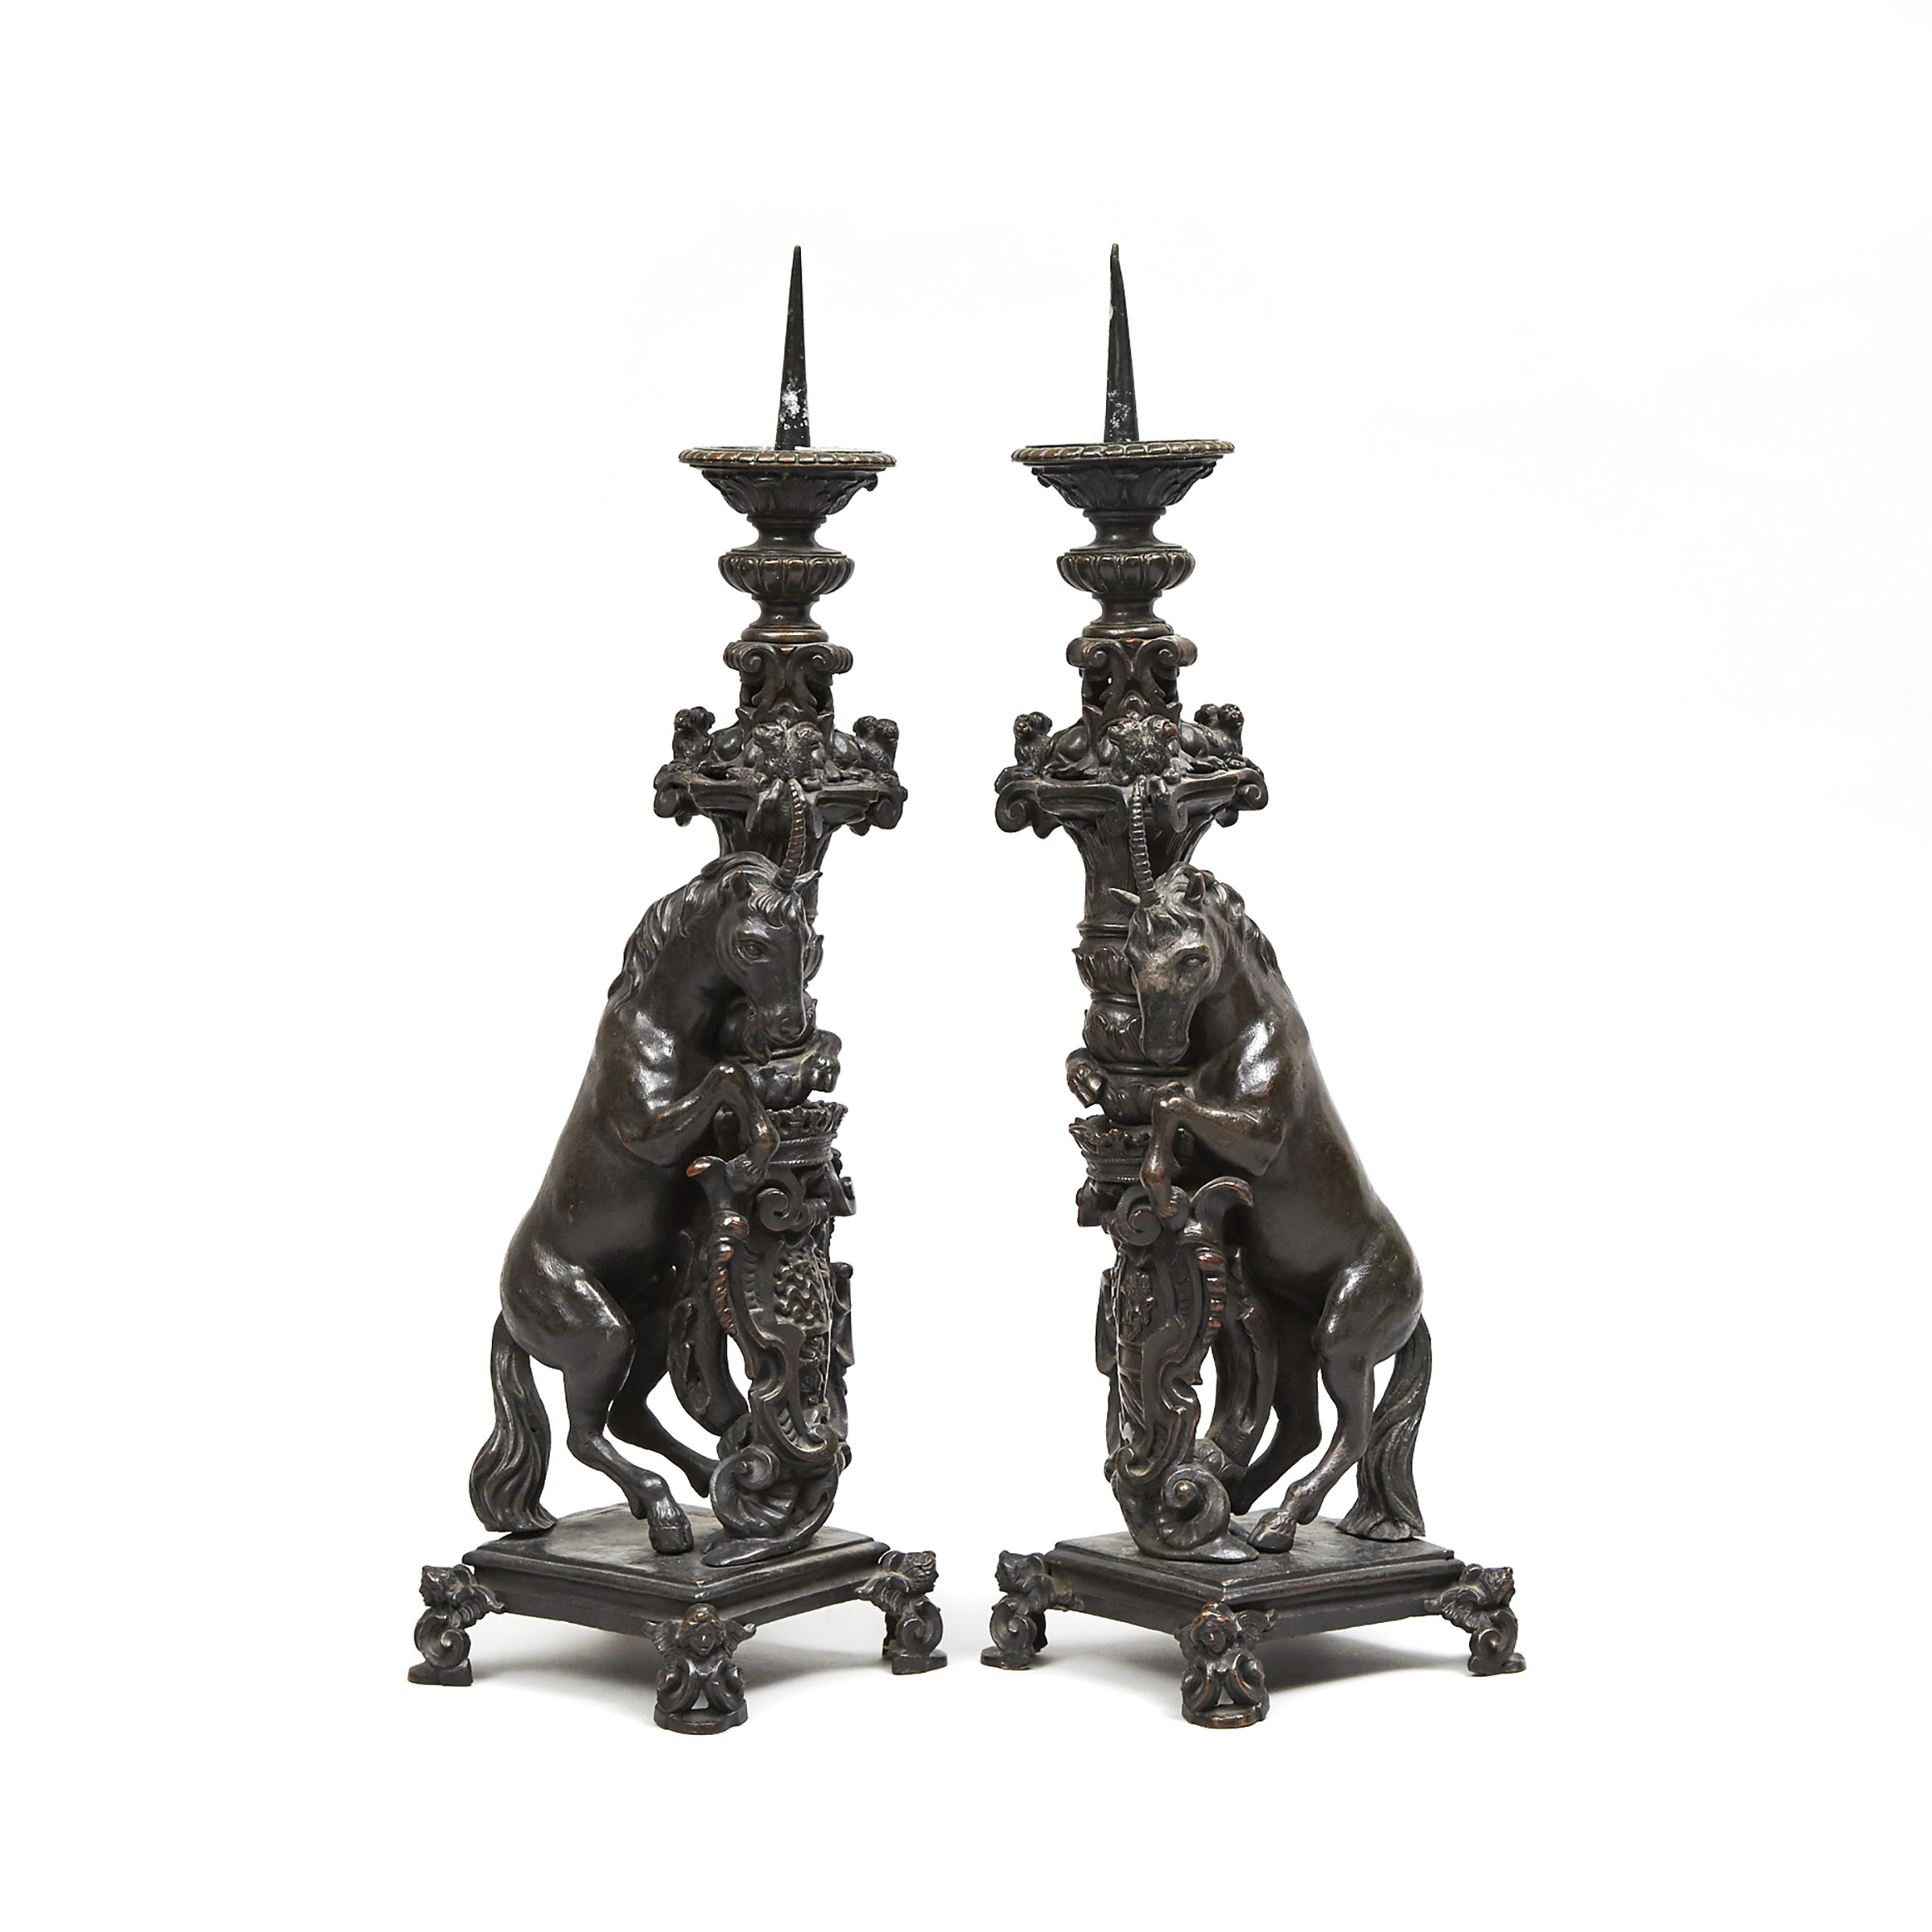 Pair of North Italian Renaissance Bronze Armourial Pricket Candlesticks, 16th or early 17th century